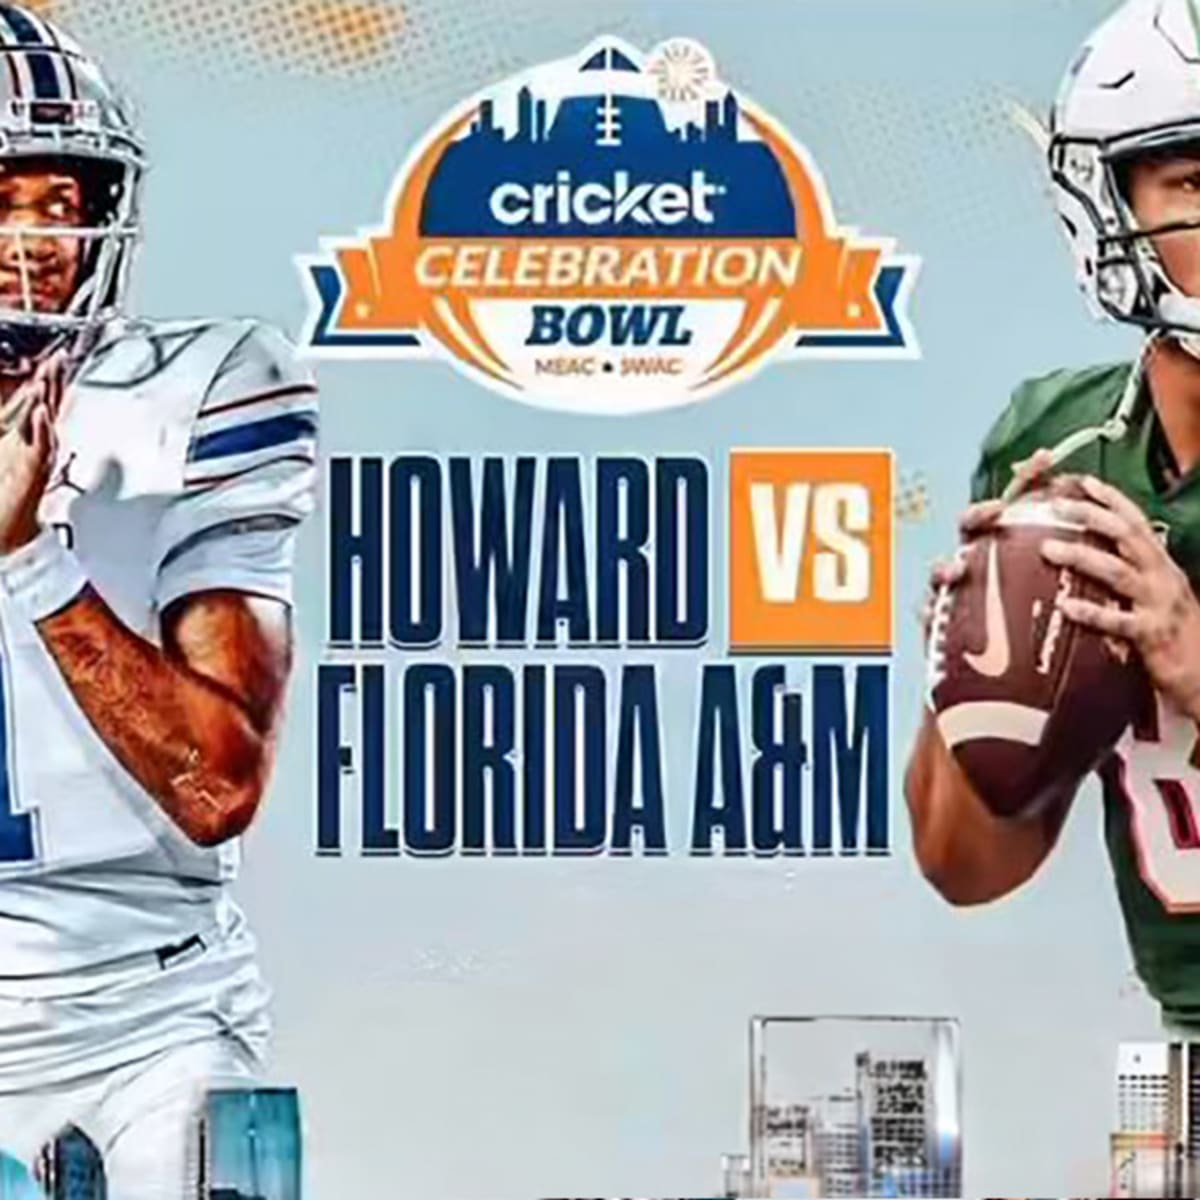 Howard University Qualifies for the Cricket Celebration Bowl for the First  Time - ESPN Press Room U.S.